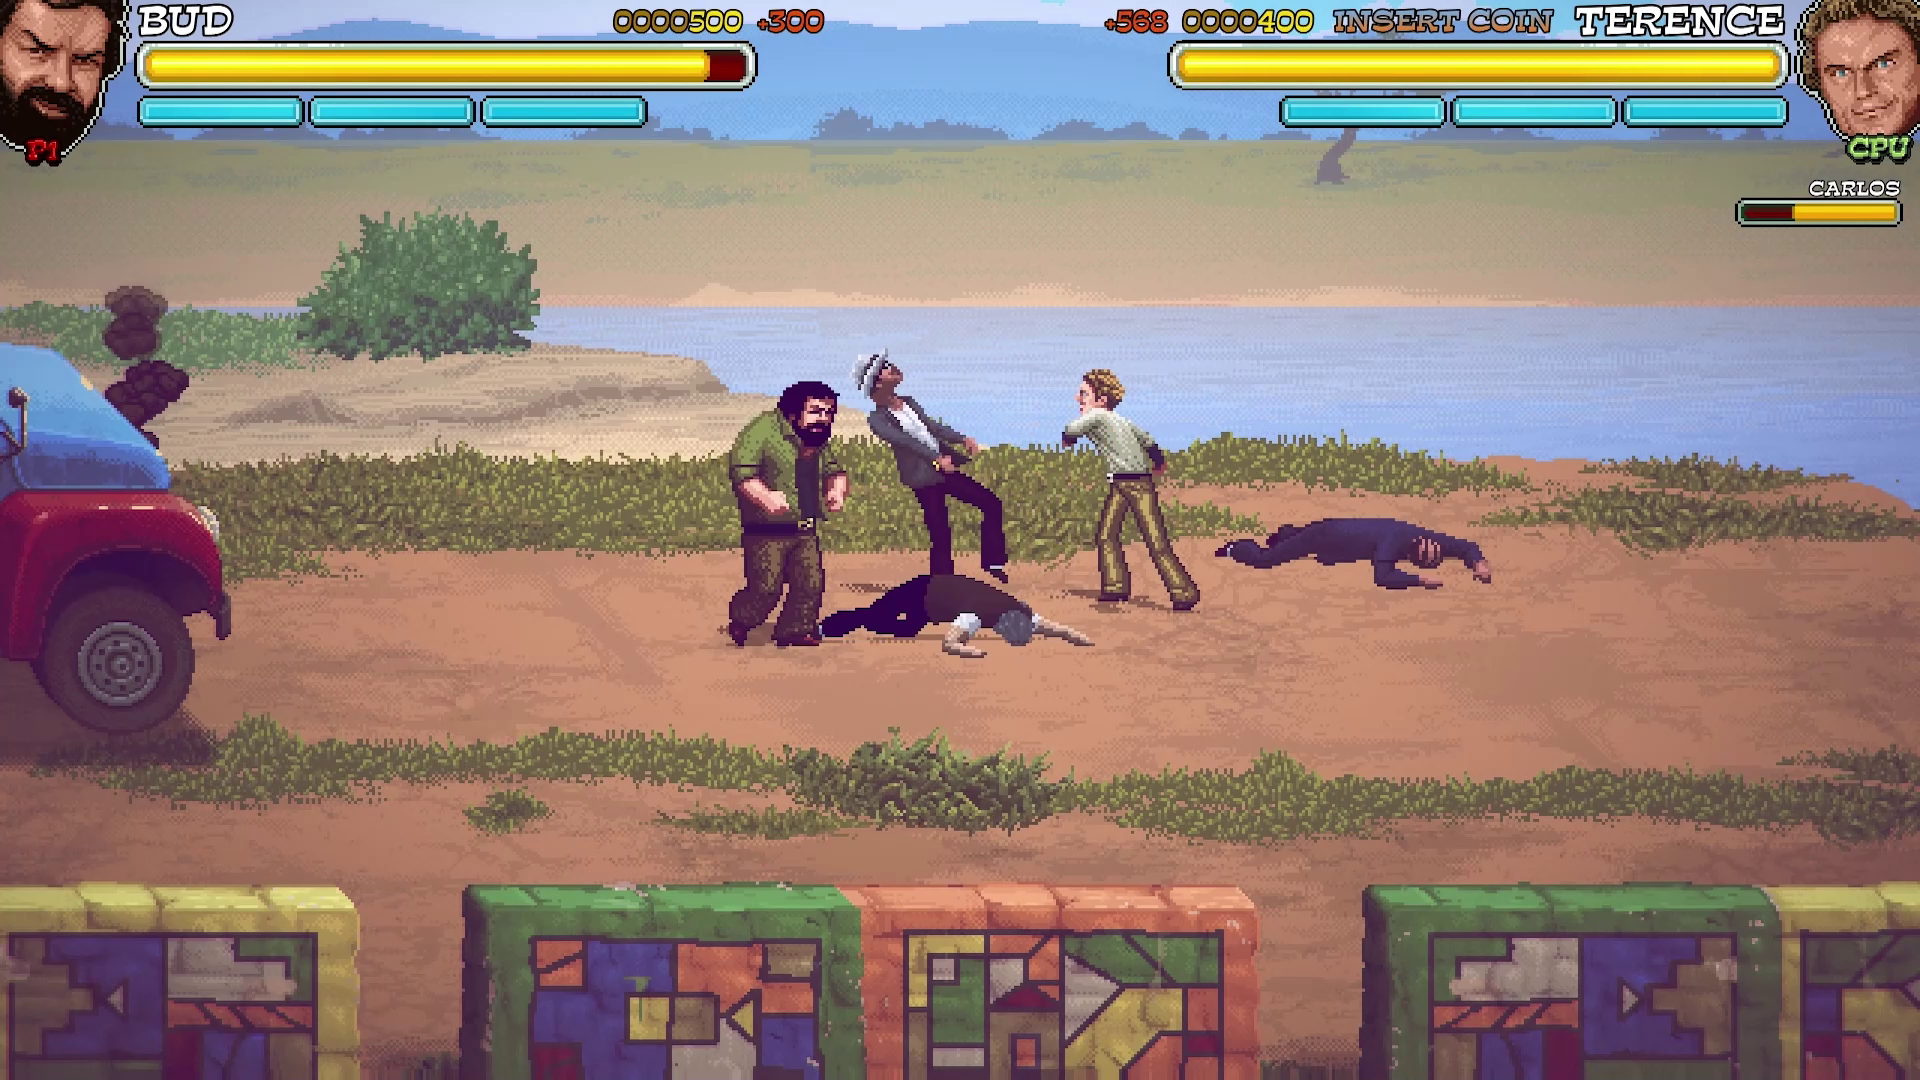 Bud Spencer & Terence Hill – Slaps and Beans 2 releases September 22nd onto  PC and consoles - Saving Content